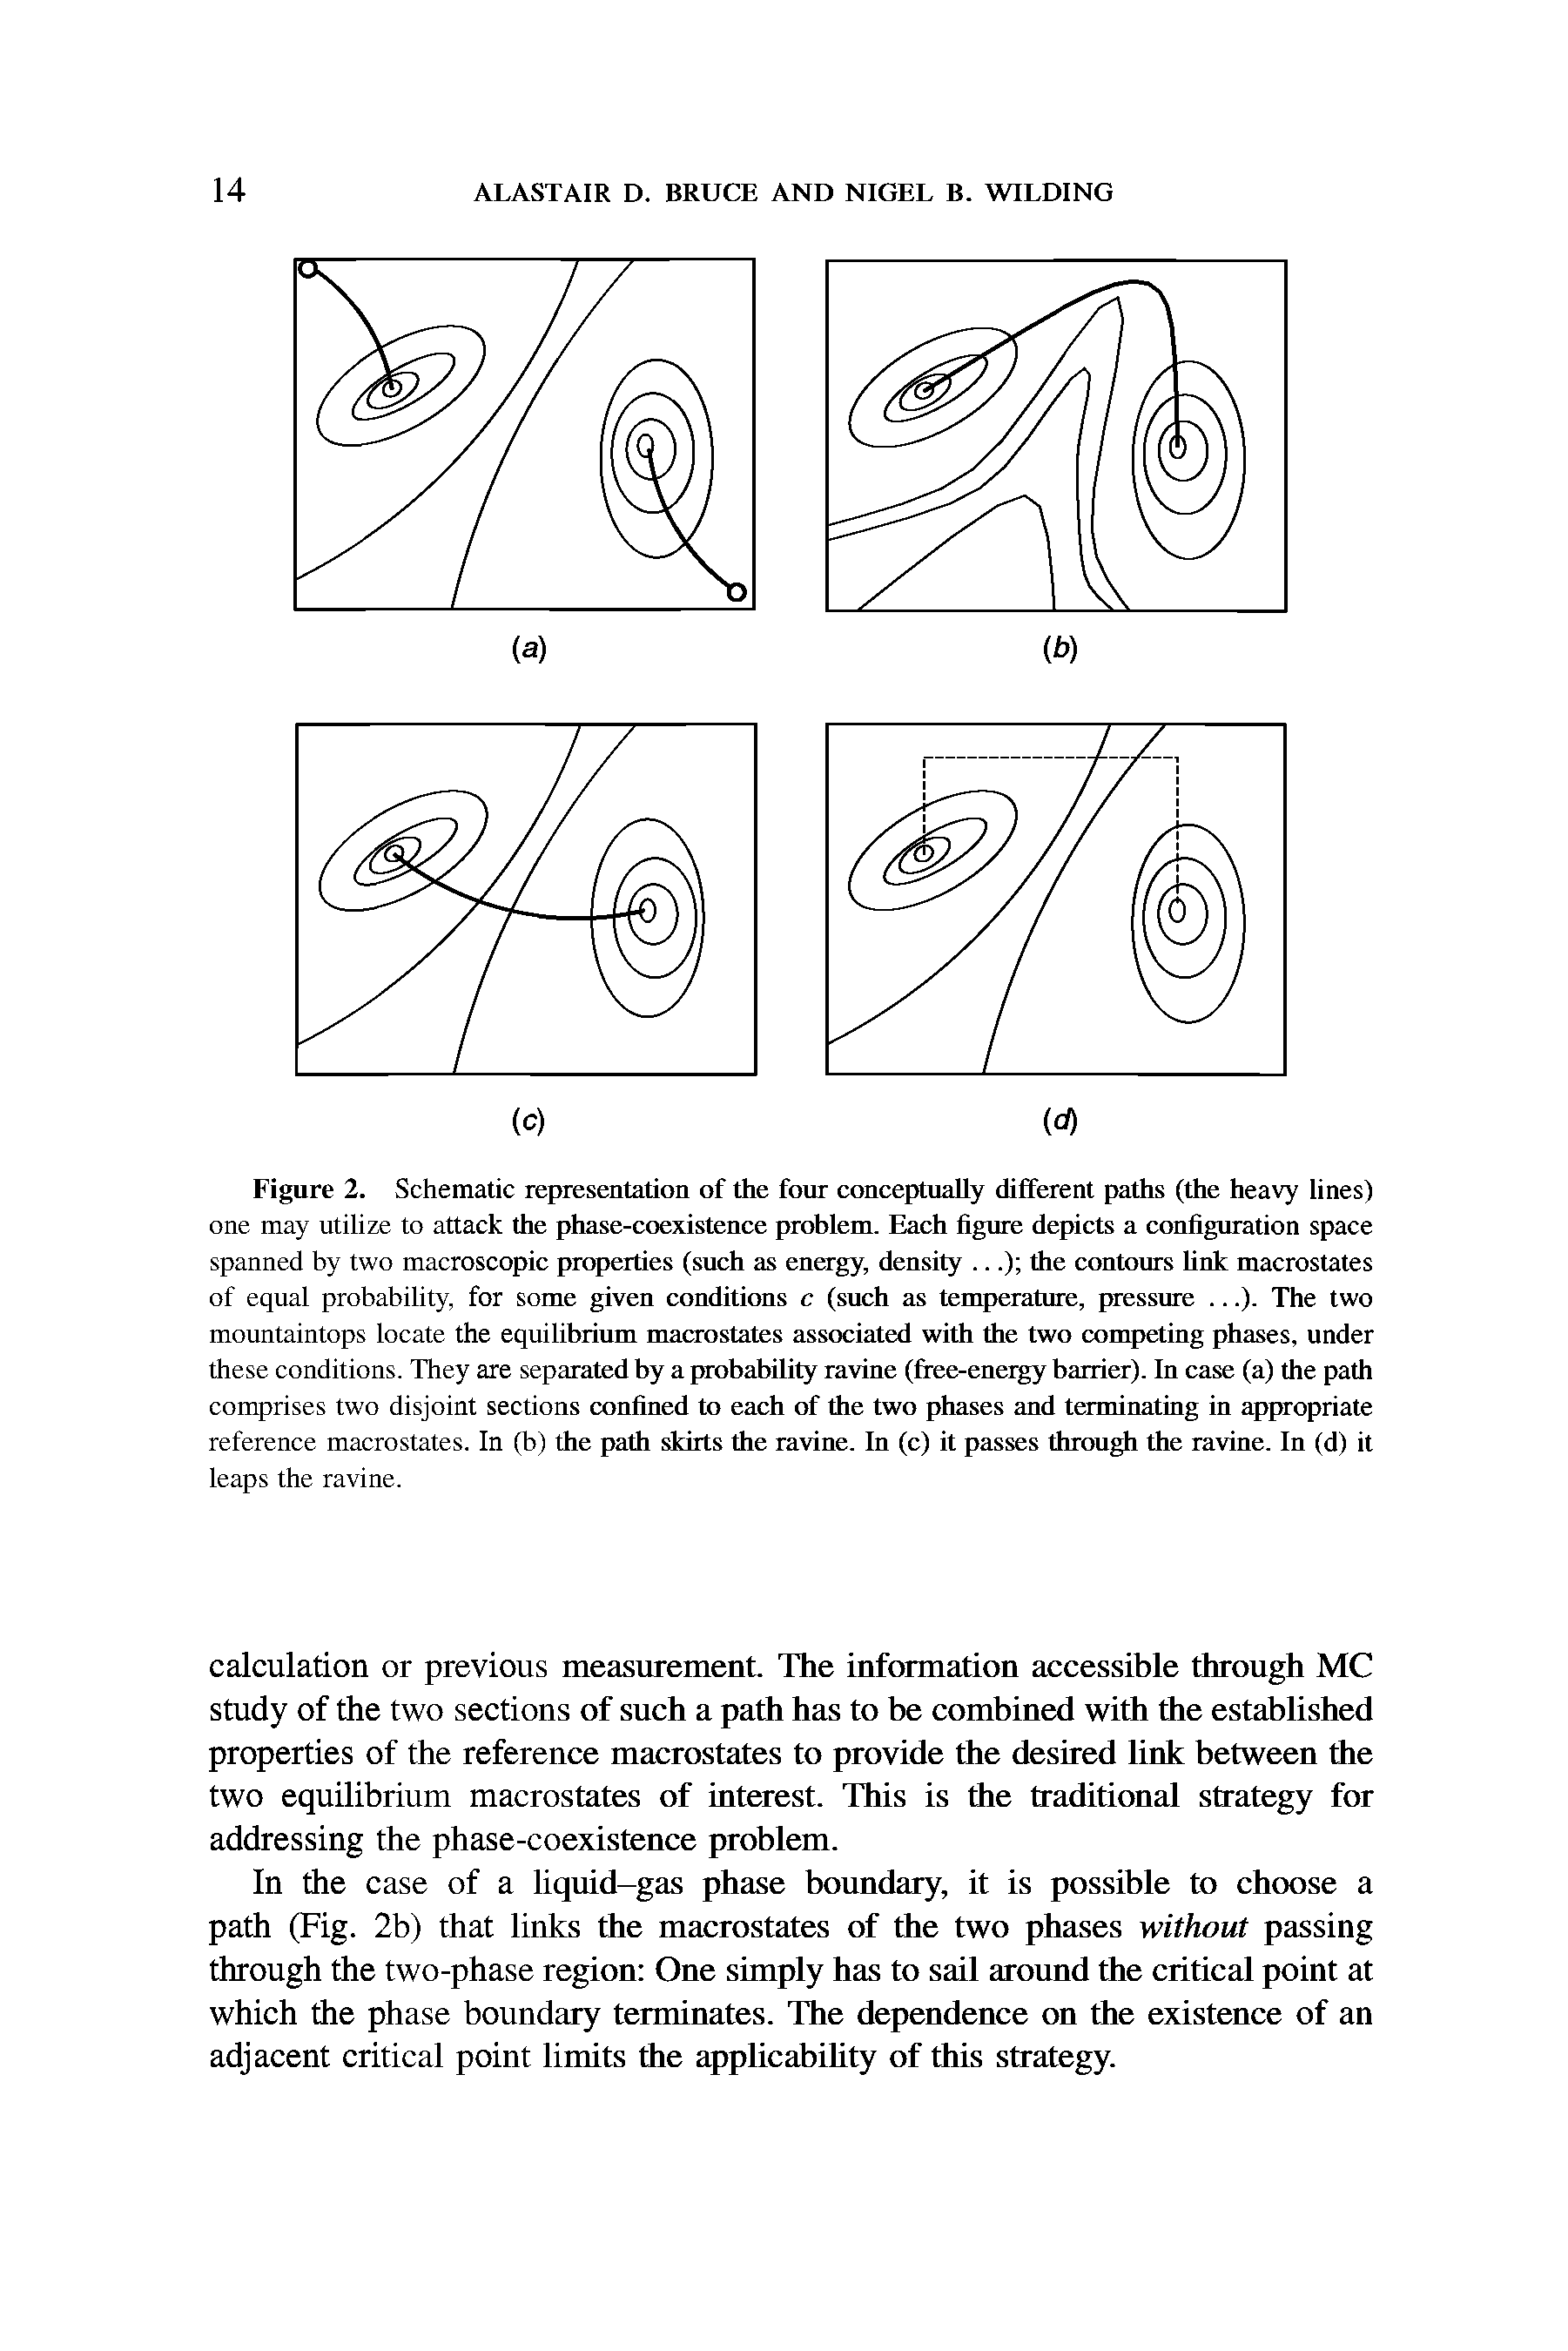 Figure 2. Schematic representation of the four conceptually different paths (the heavy lines) one may utilize to attack the phase-coexistence problem. Each figure depicts a configuration space spanned by two macroscopic properties (such as energy, density. ..) the contours link macrostates of equal probability, for some given conditions c (such as temperature, pressure. ..). The two mountaintops locate the equilibrium macro states associated with the two competing phases, under these conditions. They are separated by a probability ravine (free-energy barrier). In case (a) the path comprises two disjoint sections confined to each of the two phases and terminating in appropriate reference macrostates. In (b) the path skirts the ravine. In (c) it passes through the ravine. In (d) it leaps the ravine.